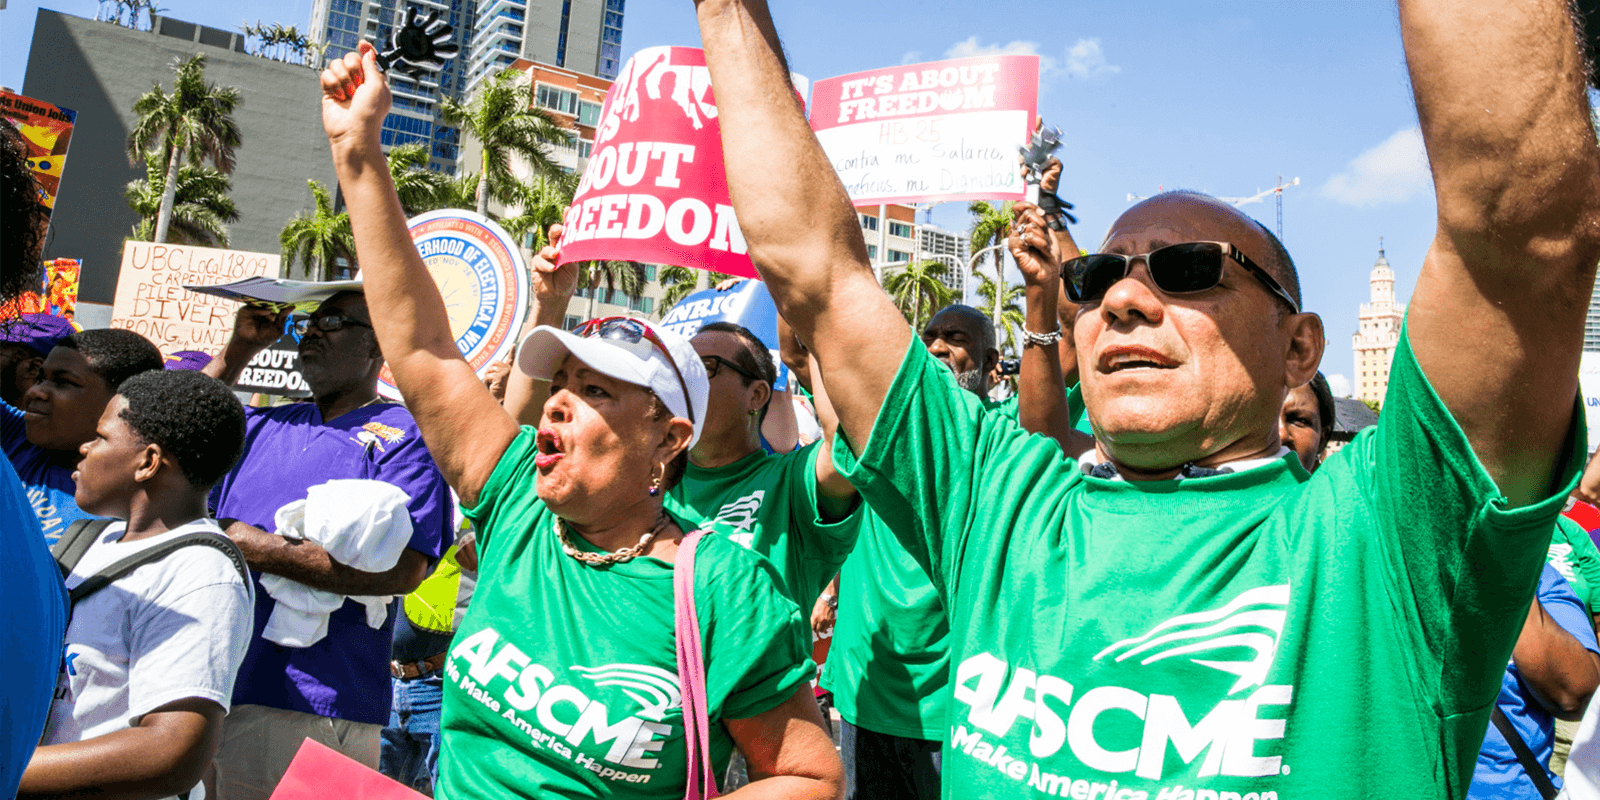 Public Service Workers Need Unions More than Ever